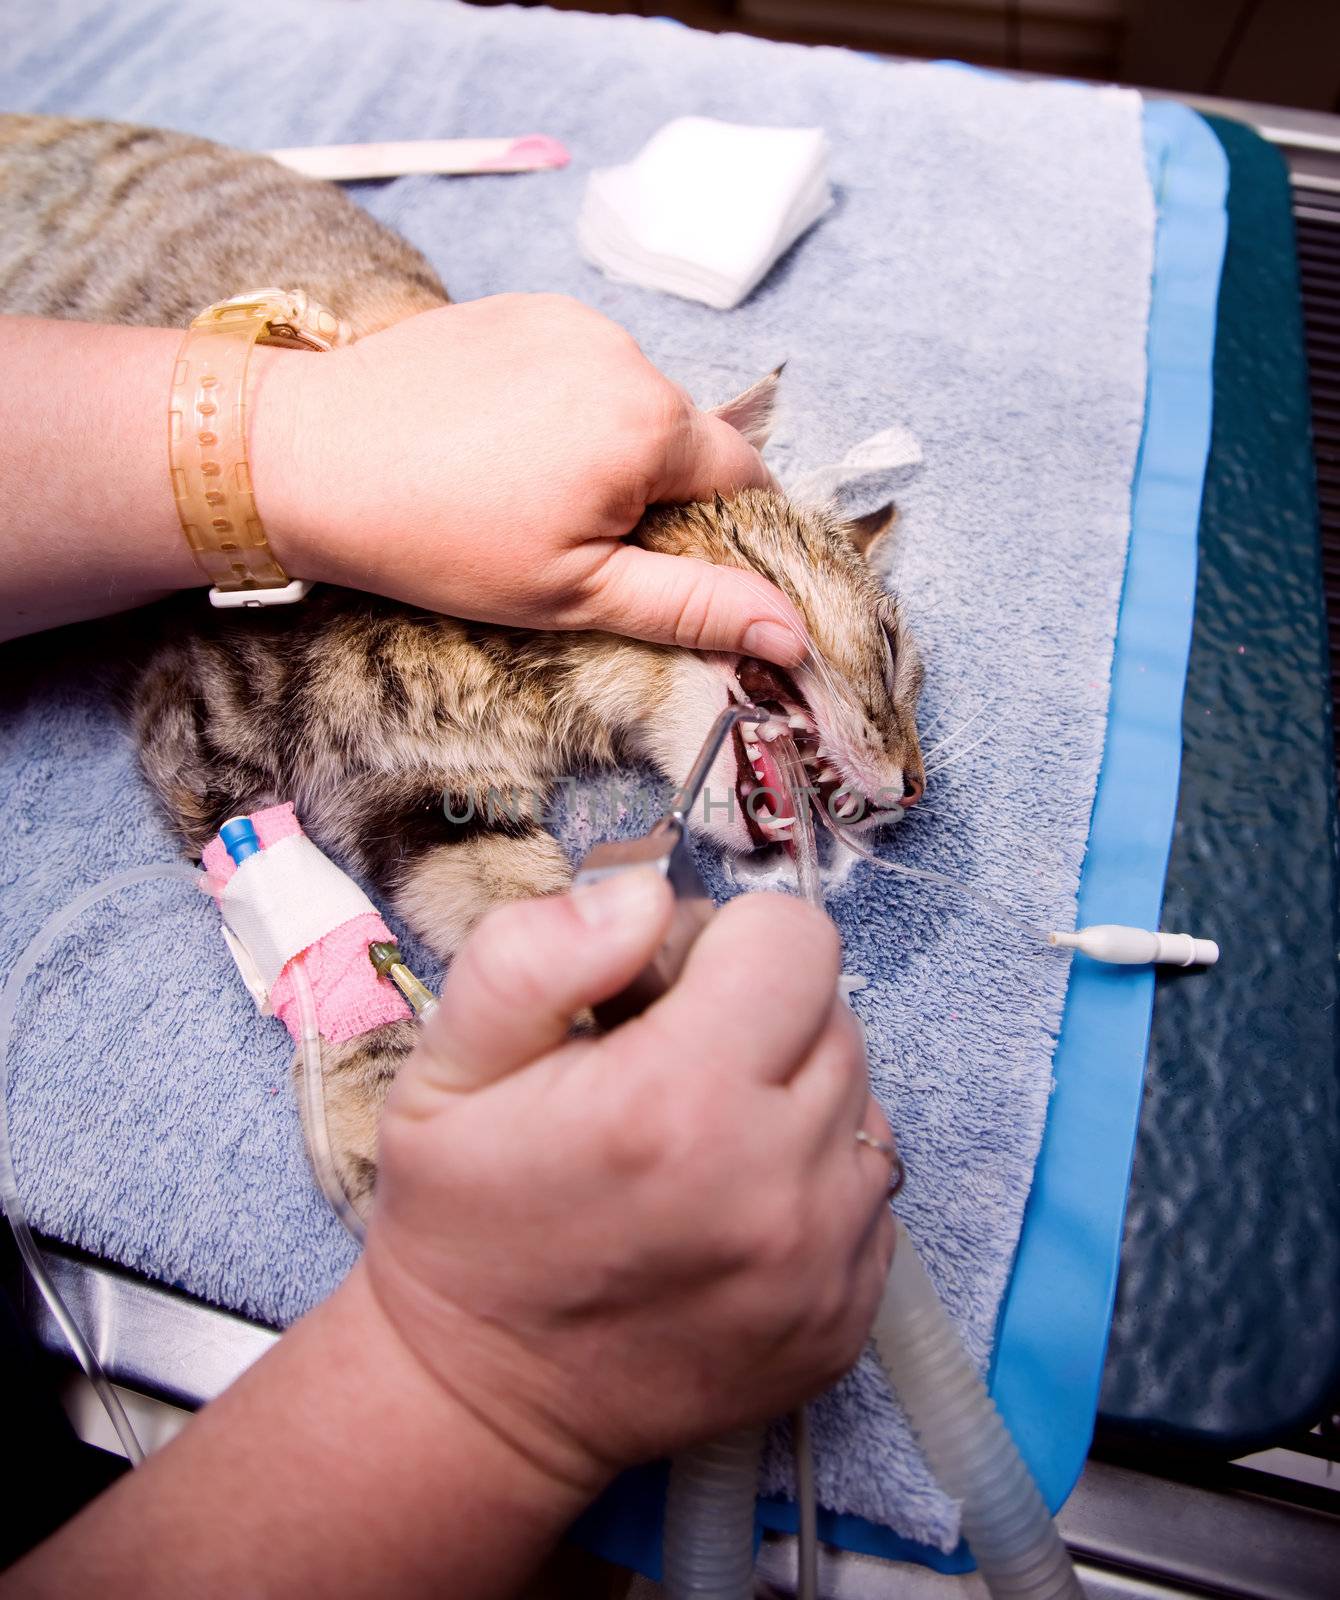 Cat's mouth being irrigated after veterinary dentistry procedure